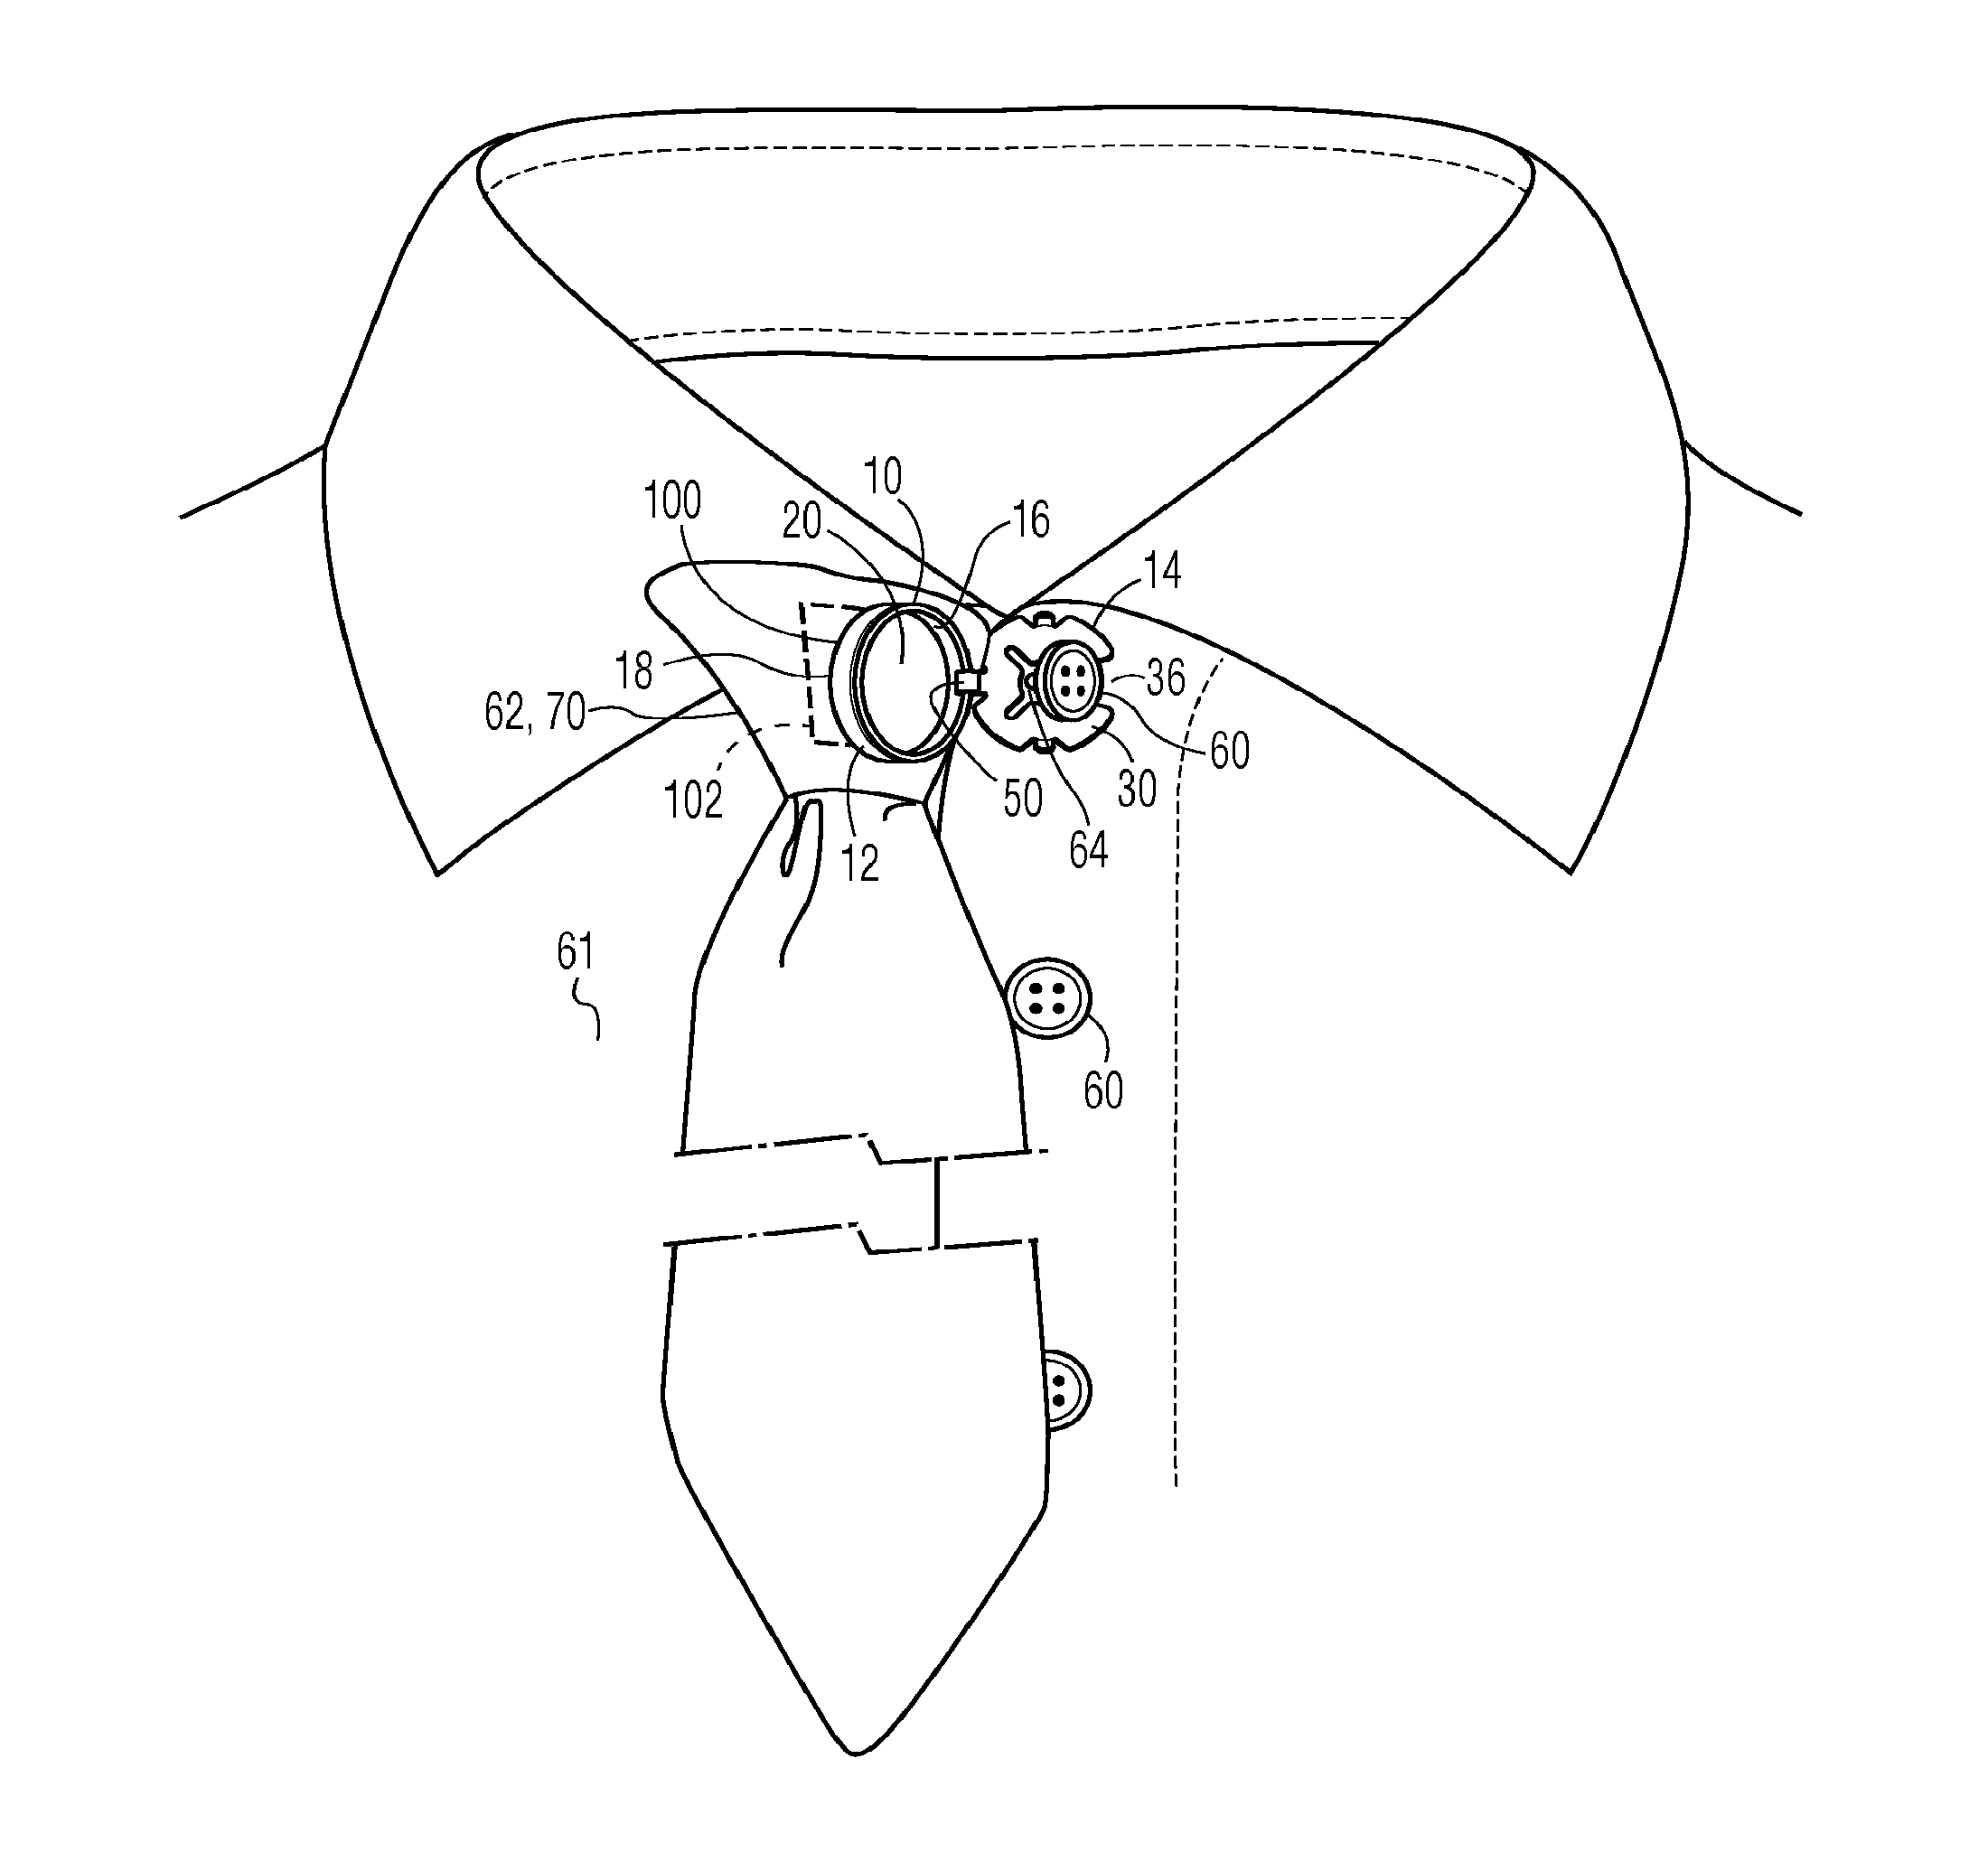 Magnetic attachment device for releasably attaching an article to a button